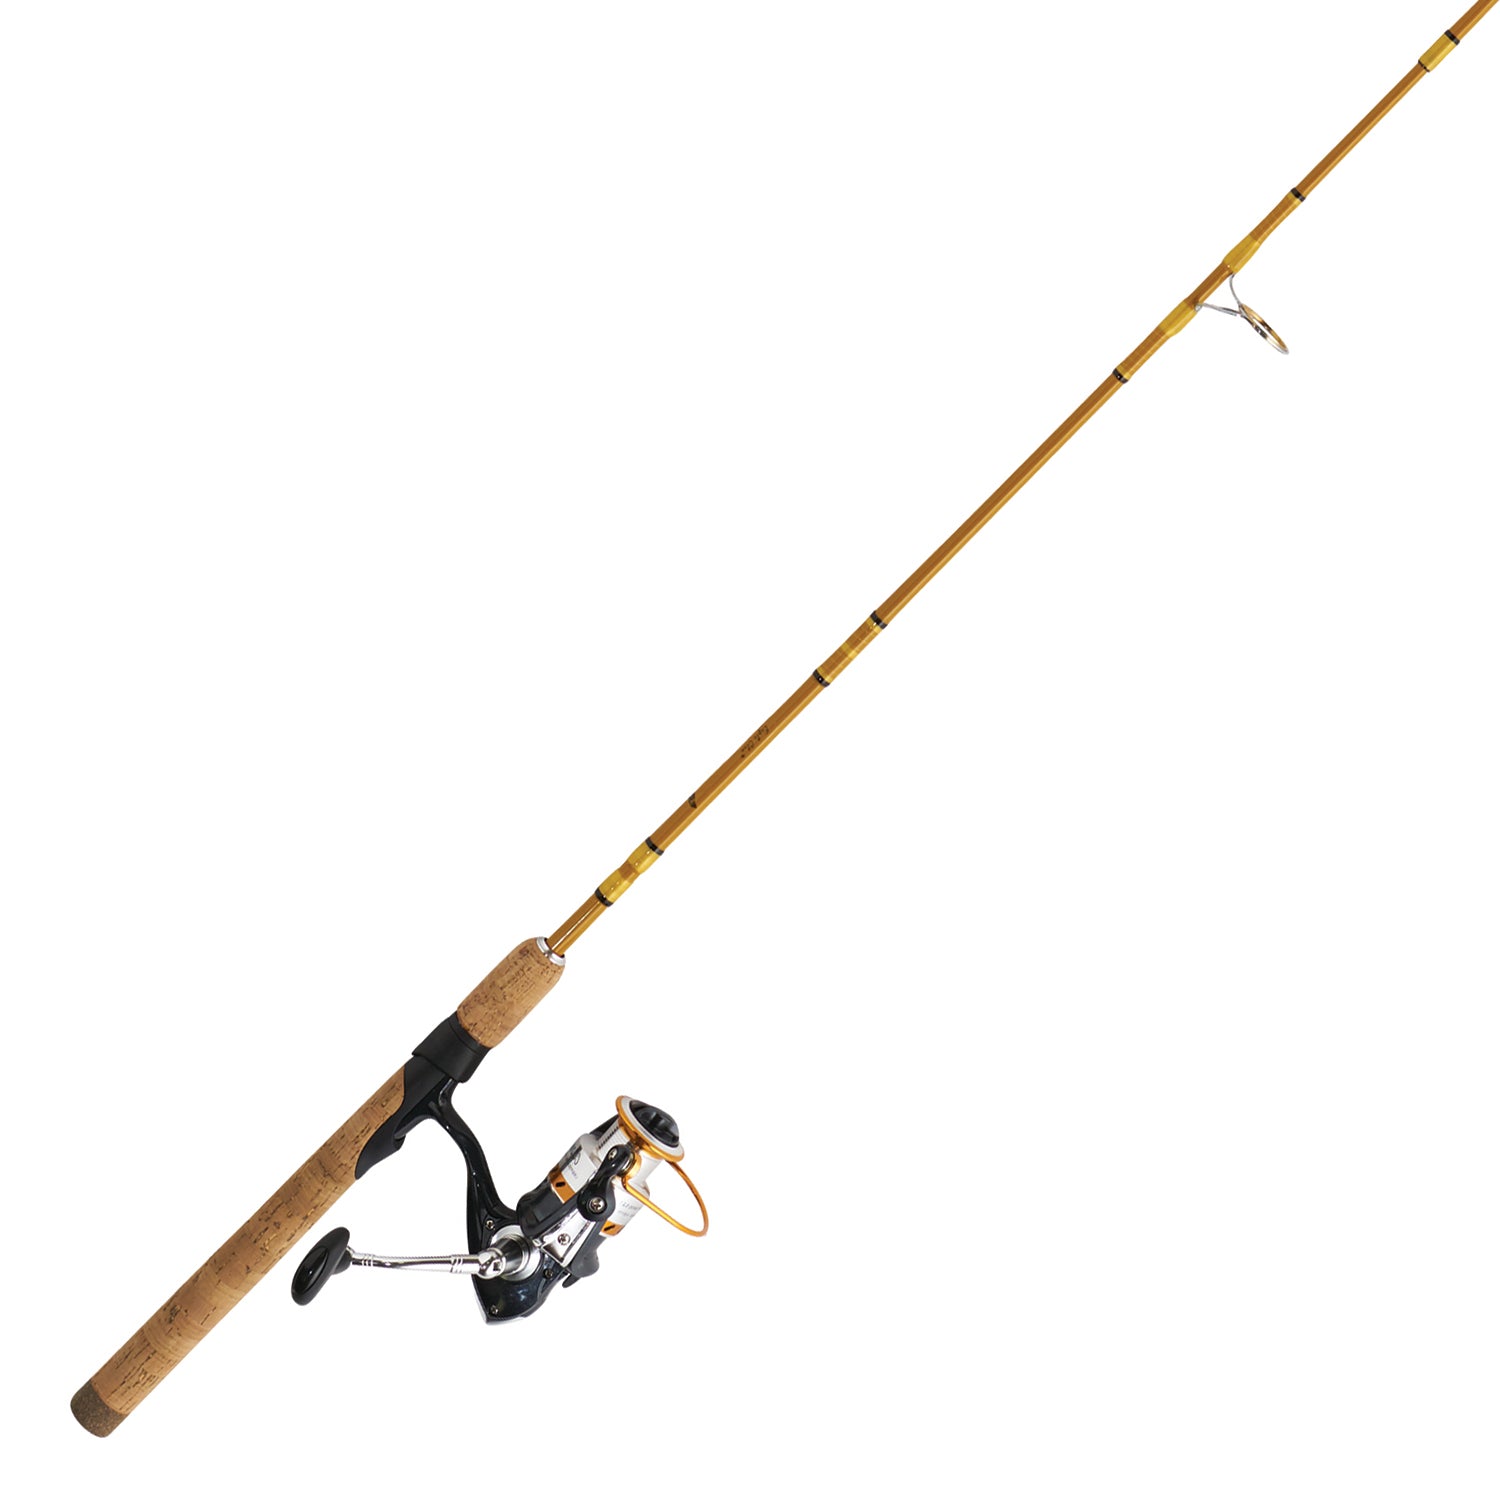 TWO EAGLE CLAW ICE EAGLE Fishing Rod & Reel Combos 24 Length #IE24L1C 2- PACK!